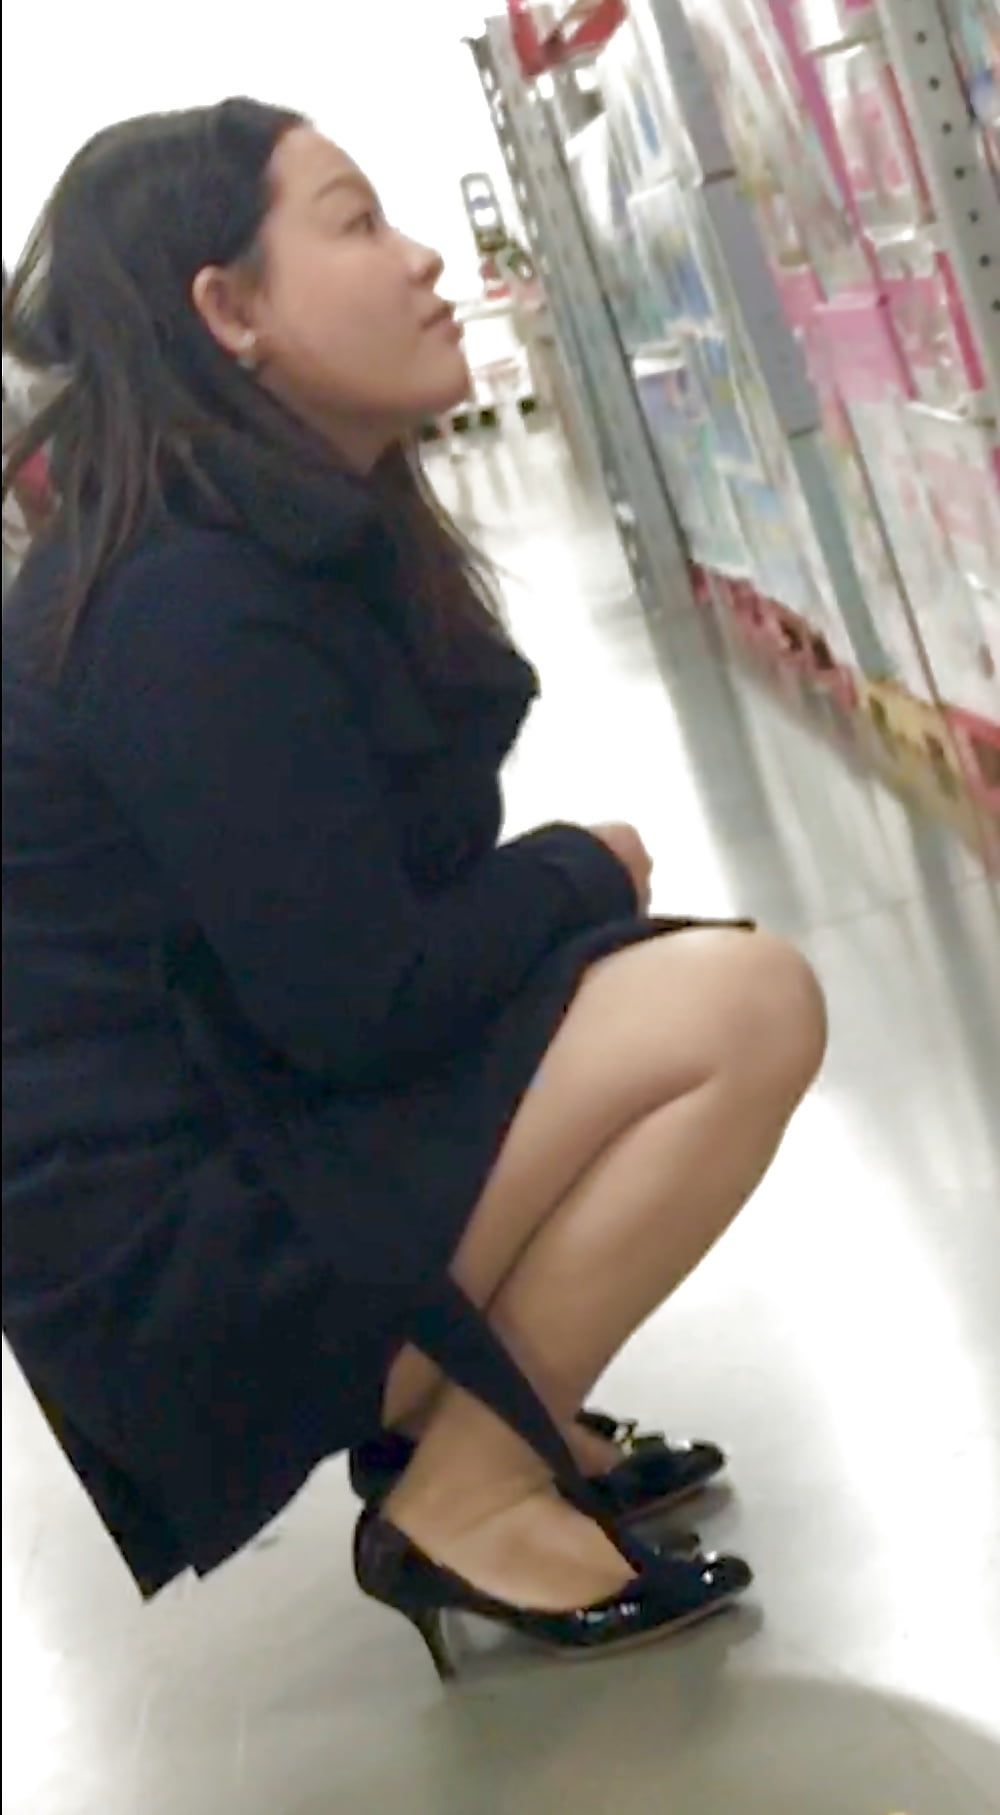 Young_Chinese_milf_getting_her_squats_done_at_store (2/25)